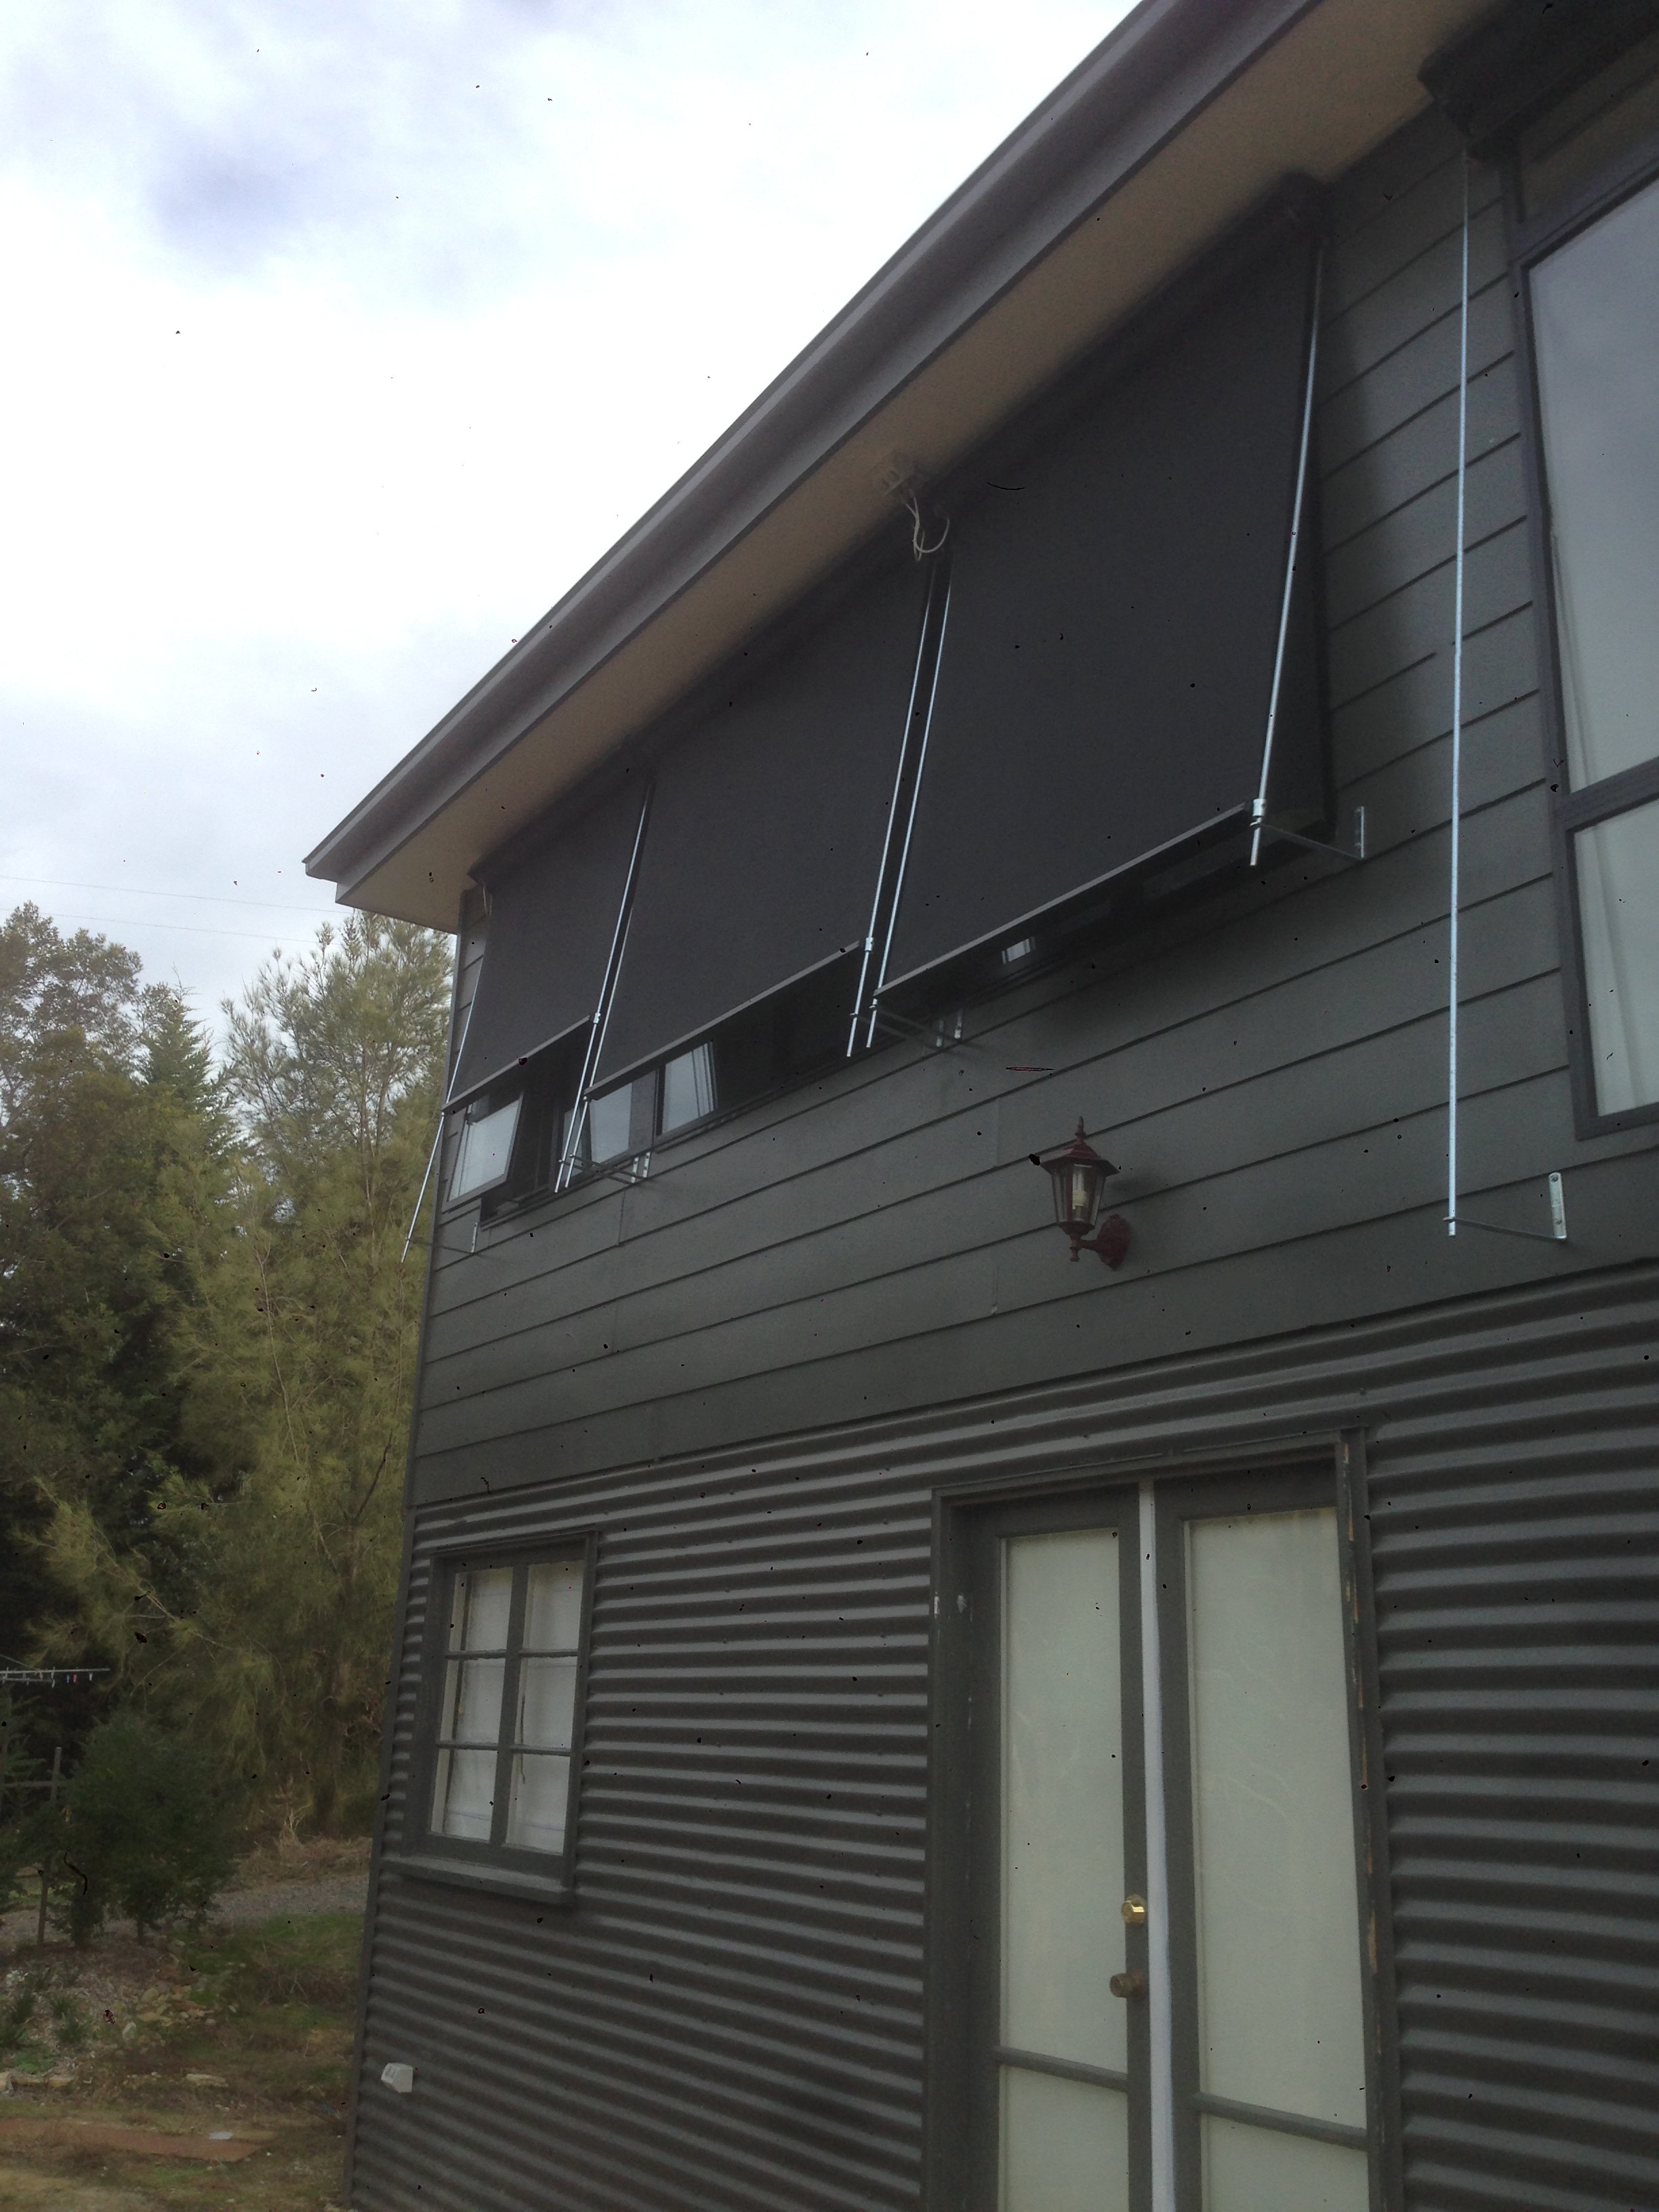 Motorised Awnings, outdoor blinds